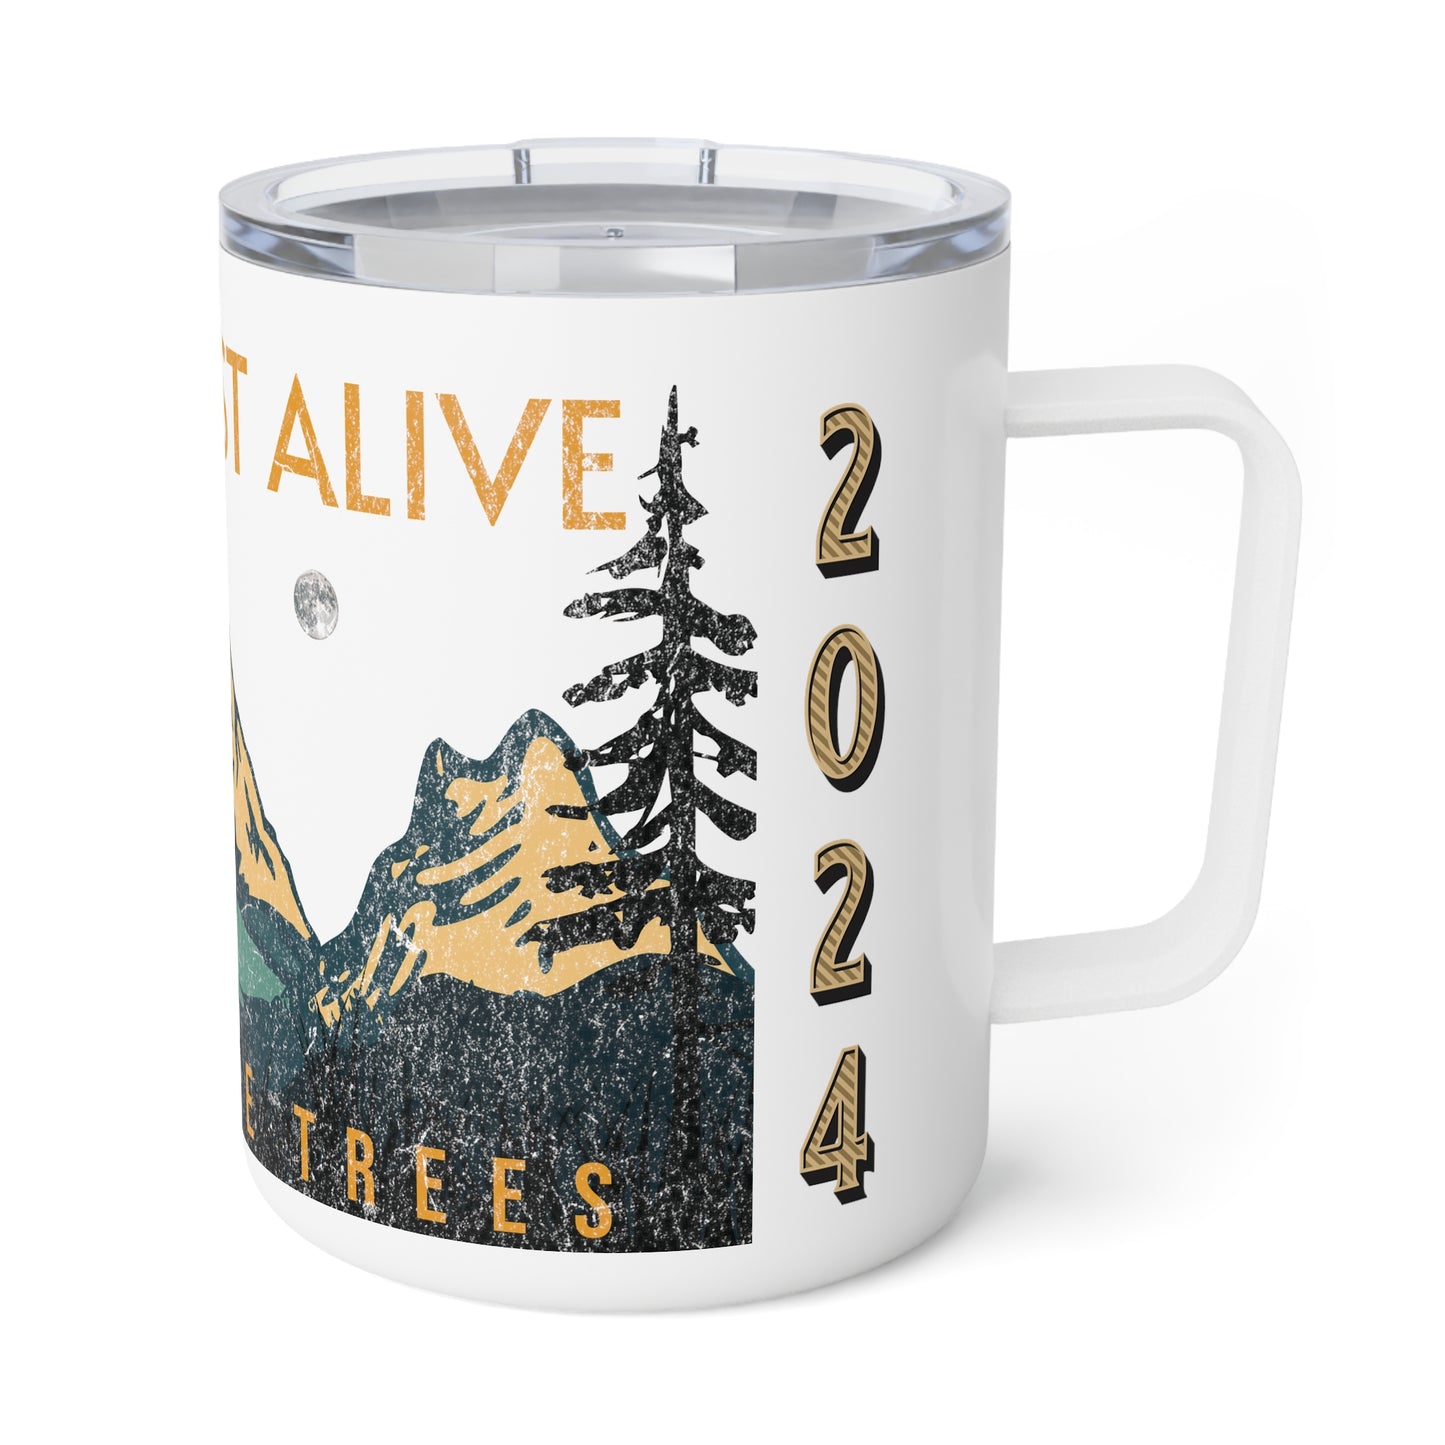 I Am Most Alive Among The Trees Insulated Coffee Mug, 10oz Tea Cup Travel Gift Camping